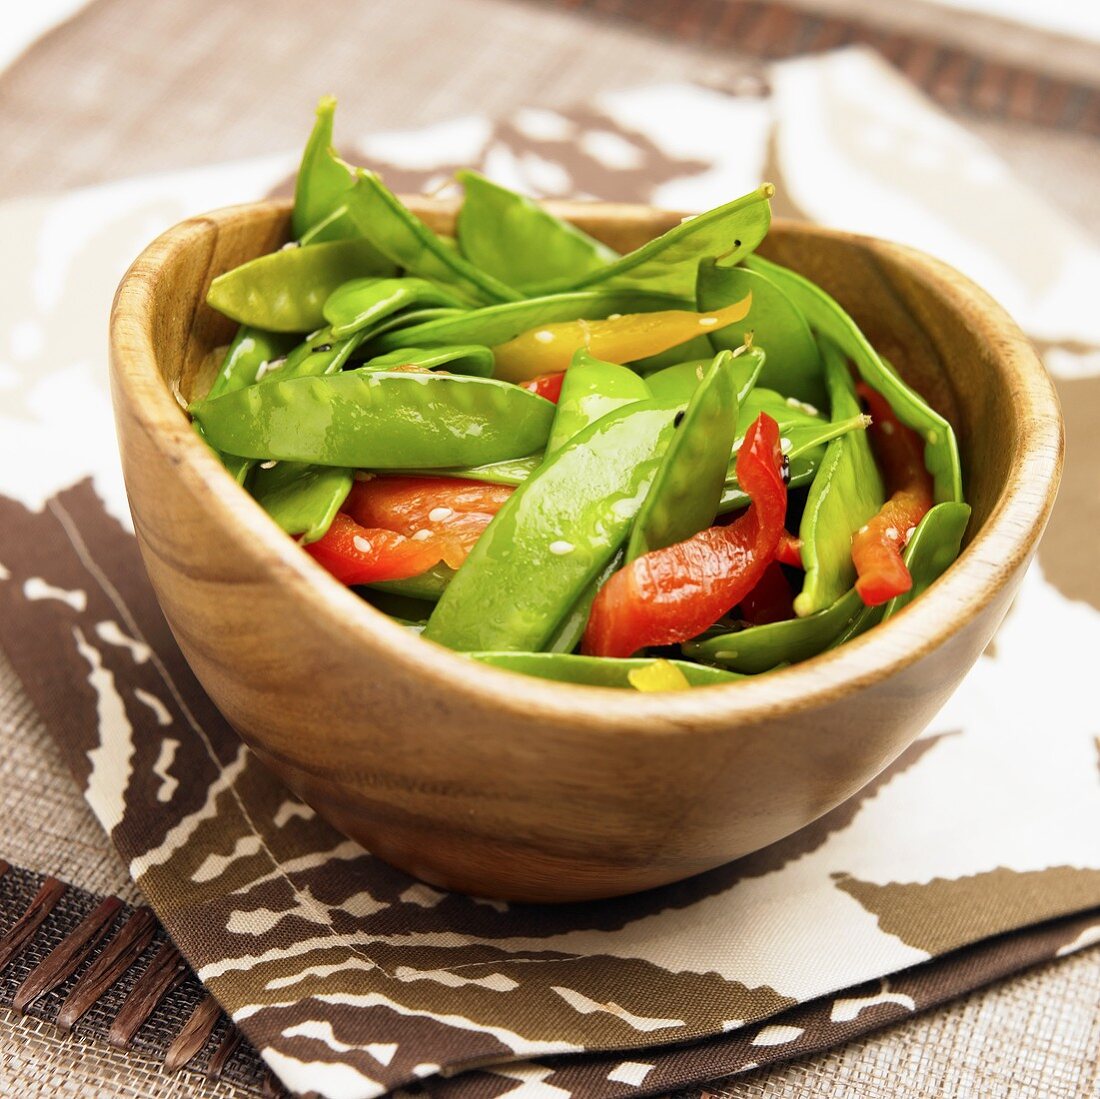 Snap Pea Salad with Red and Yellow Bell Peppers; Wooden Bowl